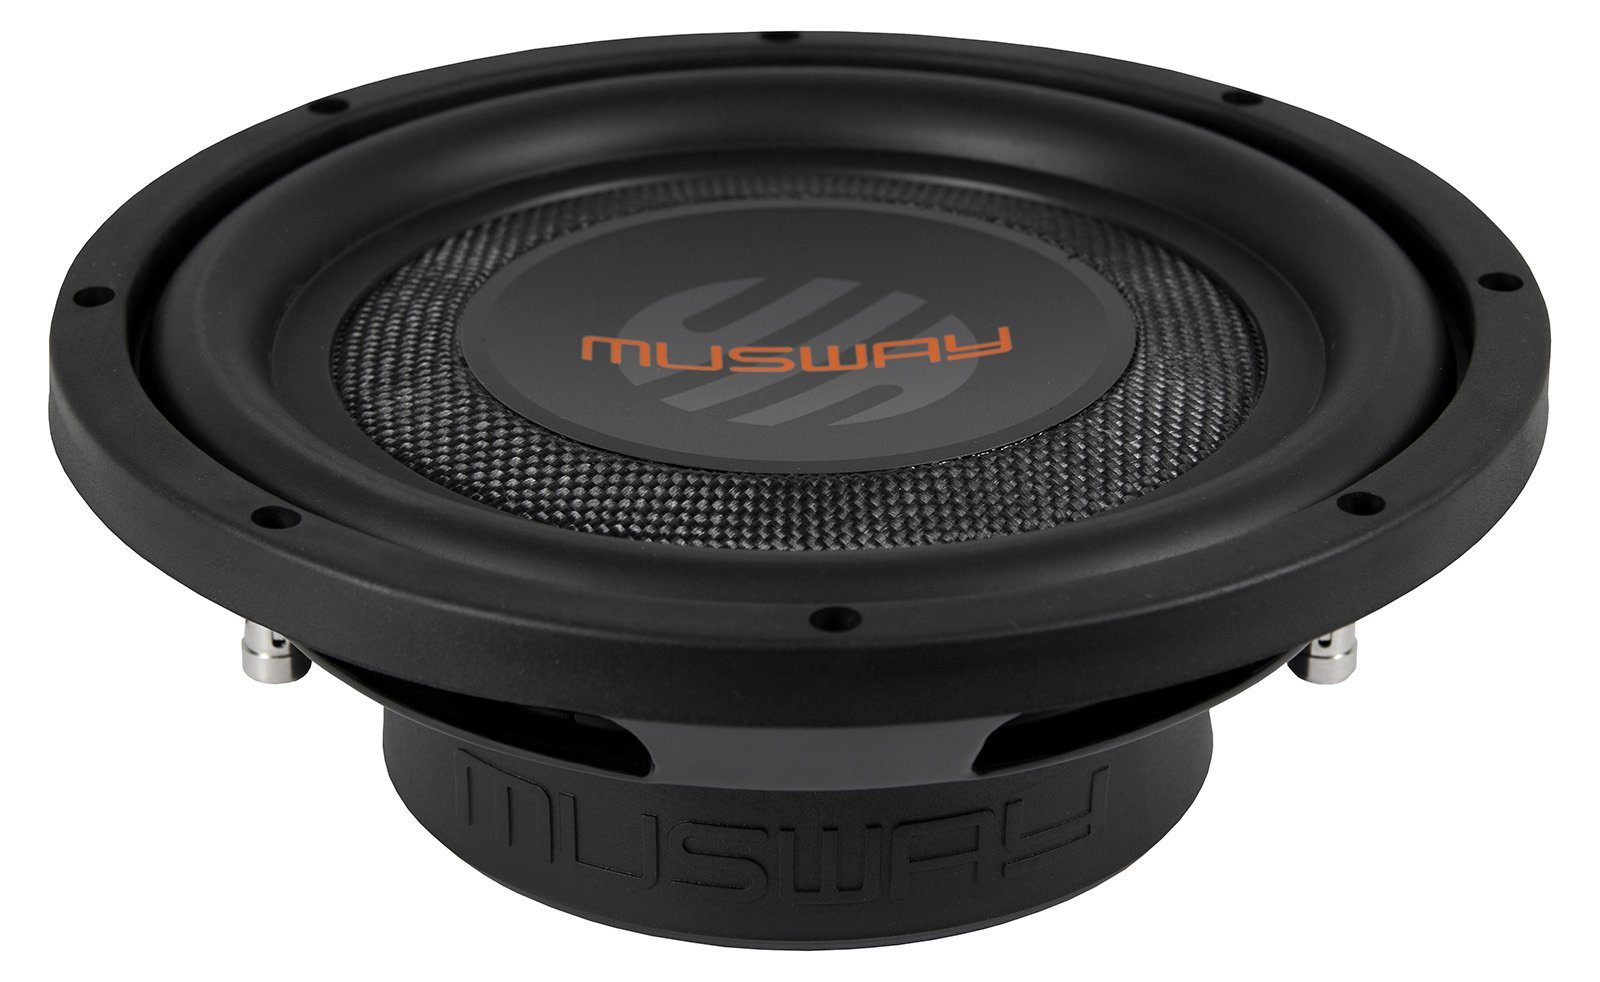 Musway MWS1022 10? FLAT Subwoofer 10? (25 cm) FLACH Subwoofer Auto-Subwoofer (300 W, Musway MWS1022, 10“ FLAT Subwoofer 10“ (25 cm) FLACH Subwoofer) | Auto-Subwoofer